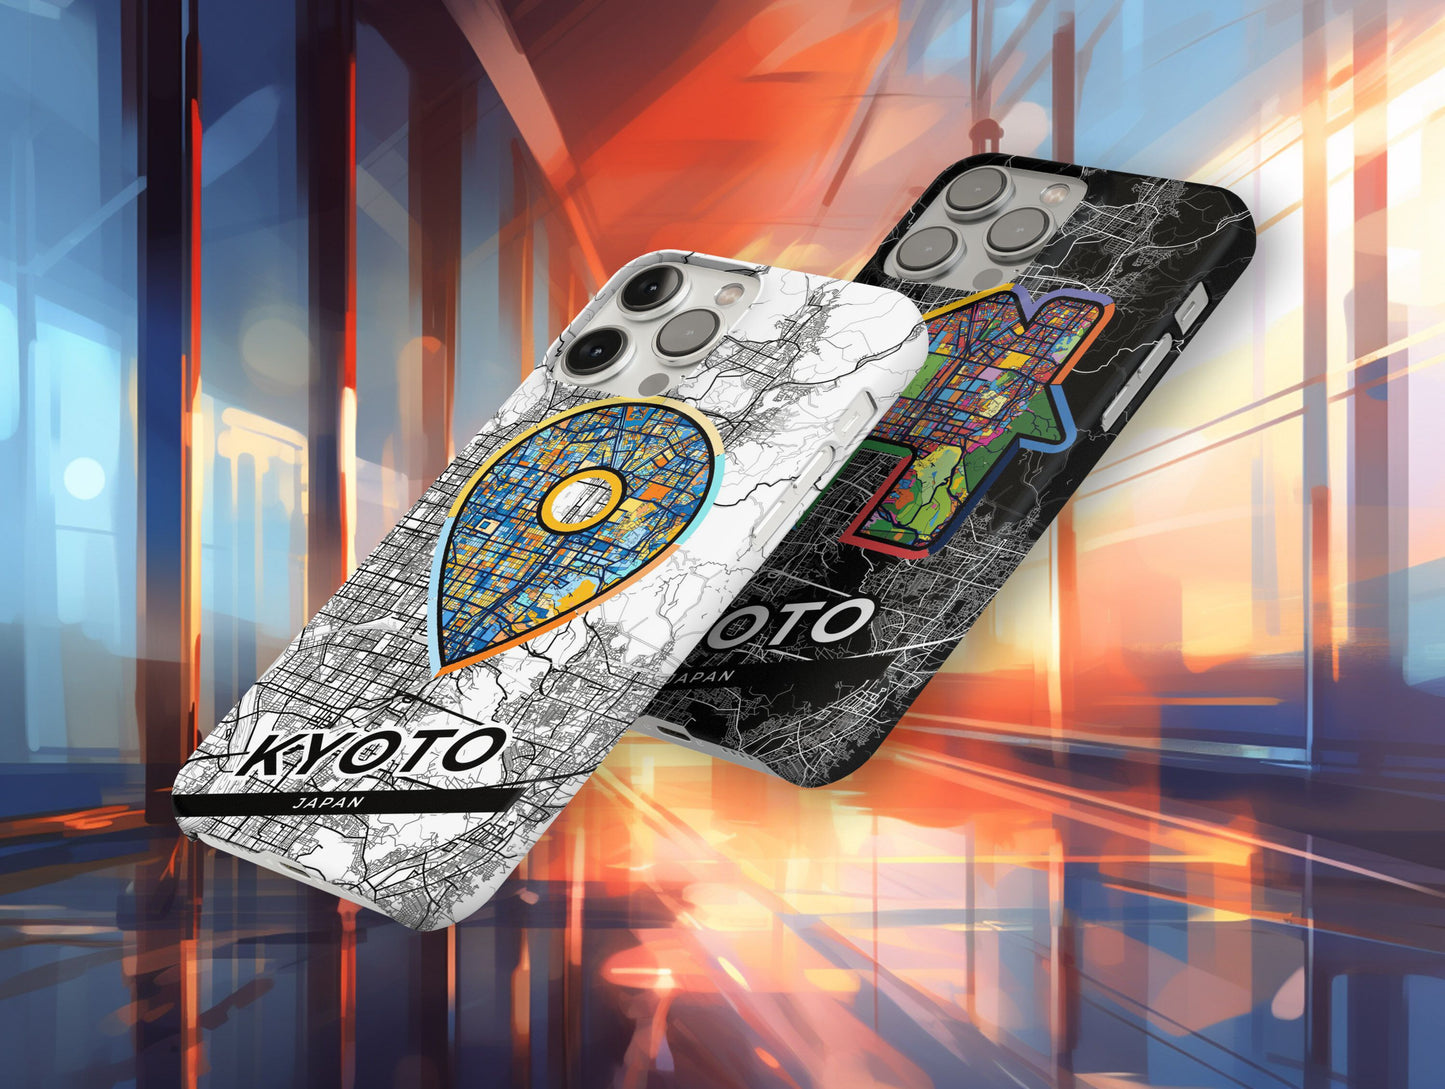 Kyoto Japan slim phone case with colorful icon. Birthday, wedding or housewarming gift. Couple match cases.